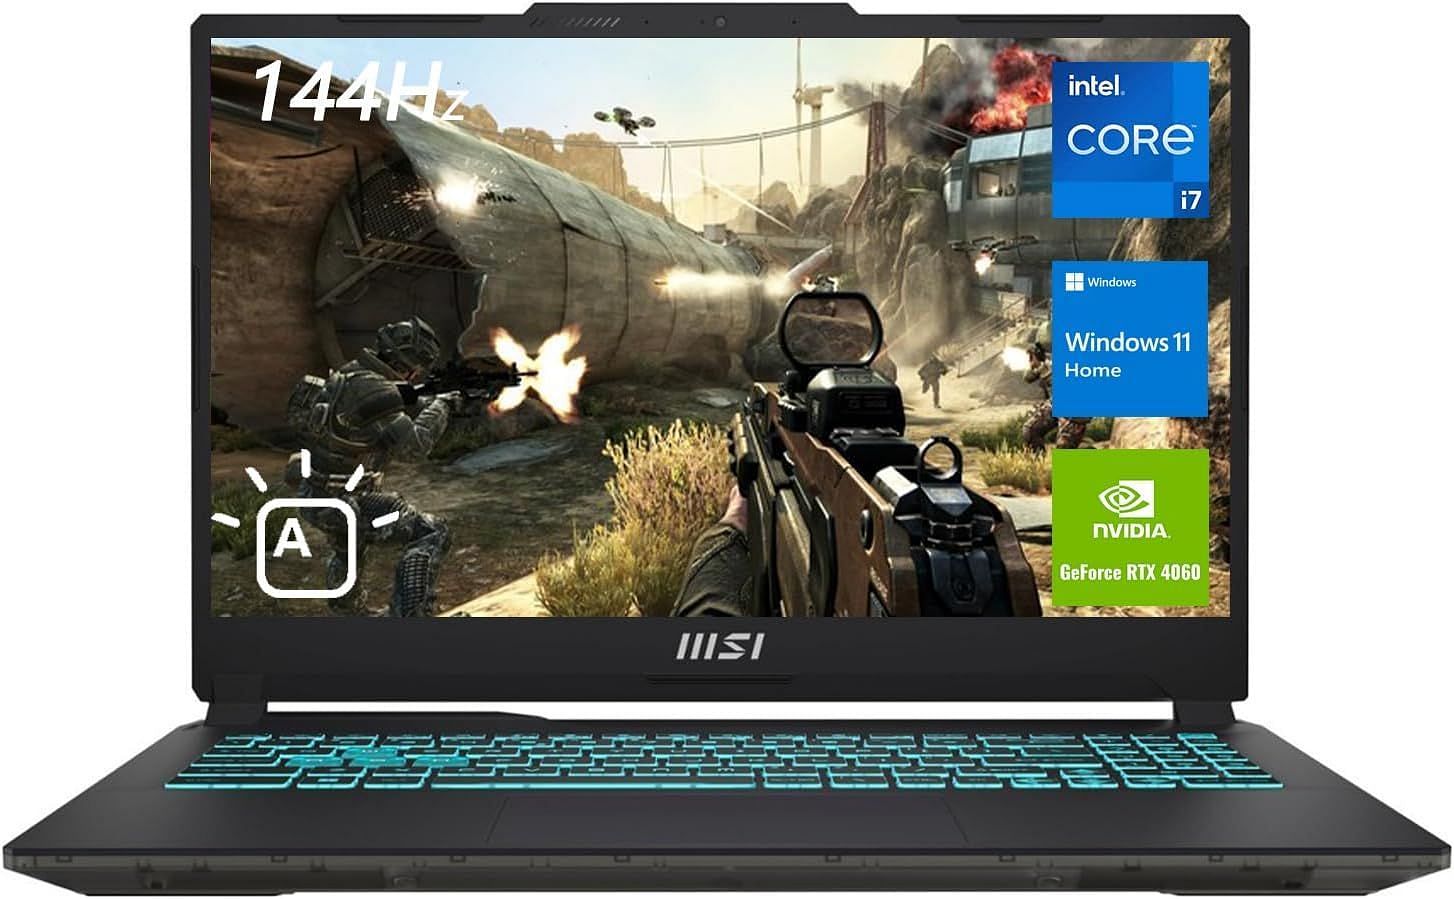 The second gaming laptop on our list is the MSI Cyborg 15 (Image via Amazon)